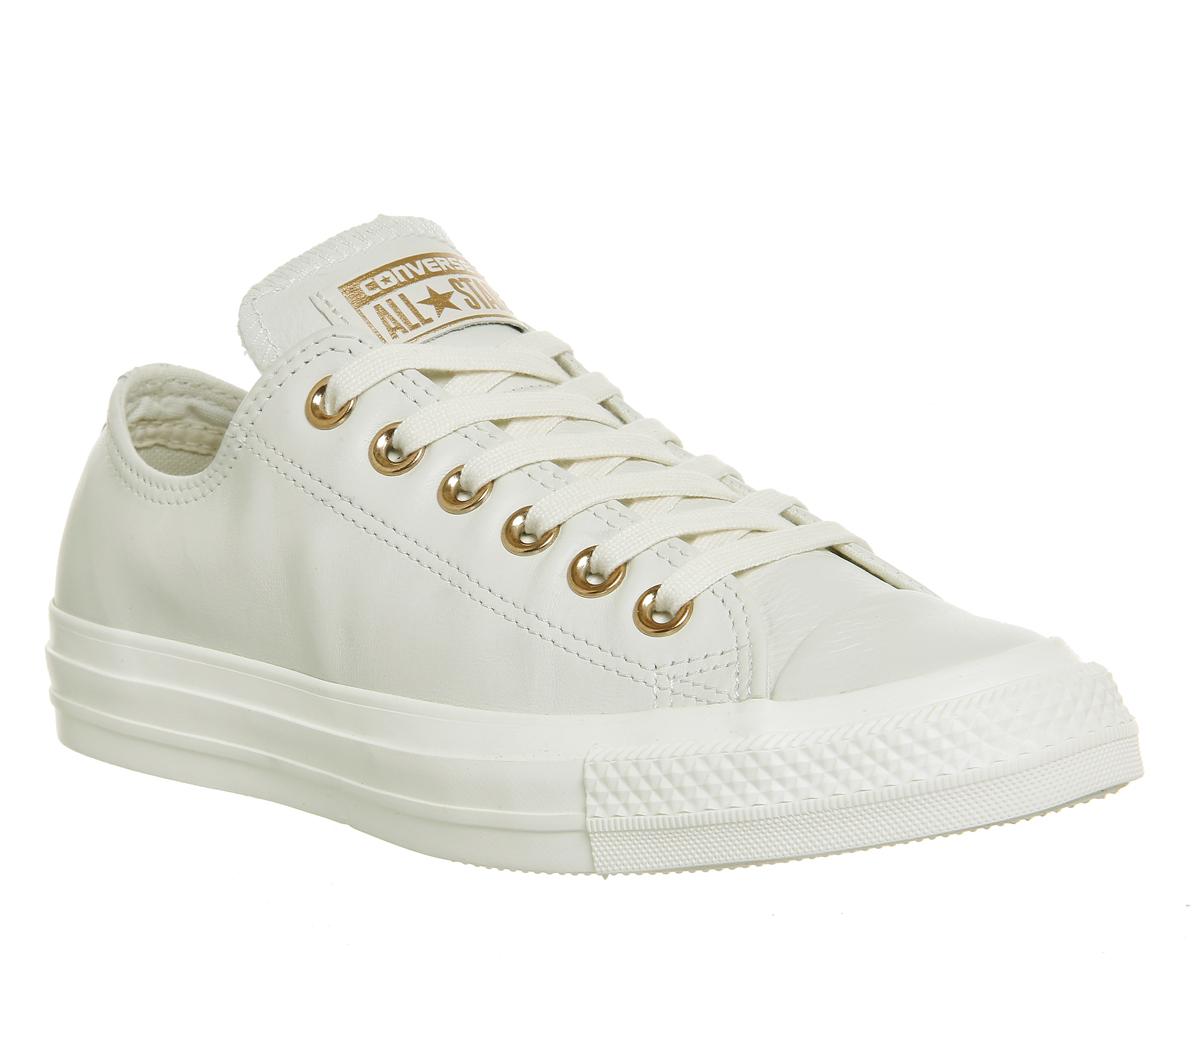 Converse All Star Low Leather Egret Rose Gold Exclusive - Hers trainers